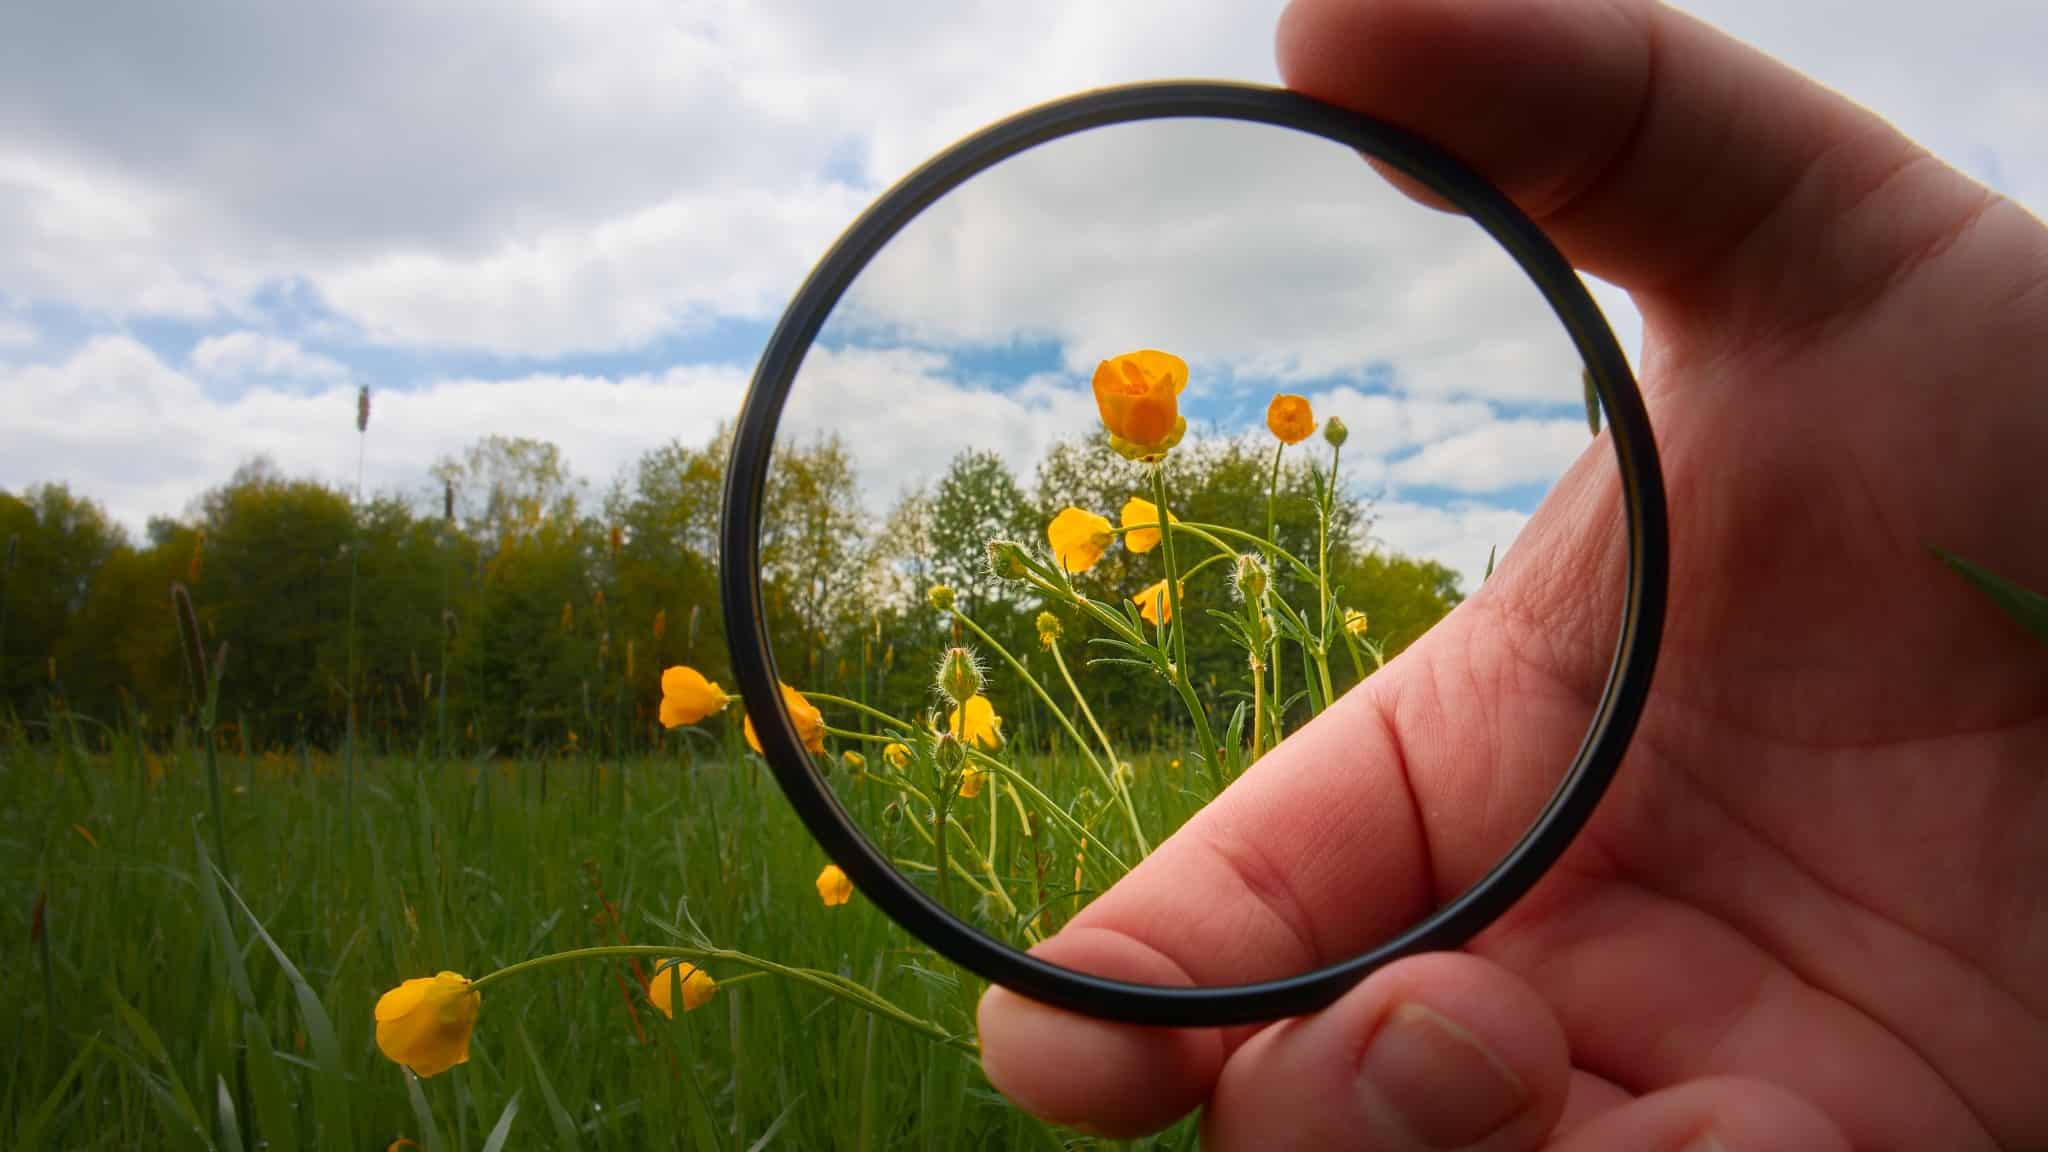 Camera Lens Filters and What They Can Do for Your Photos